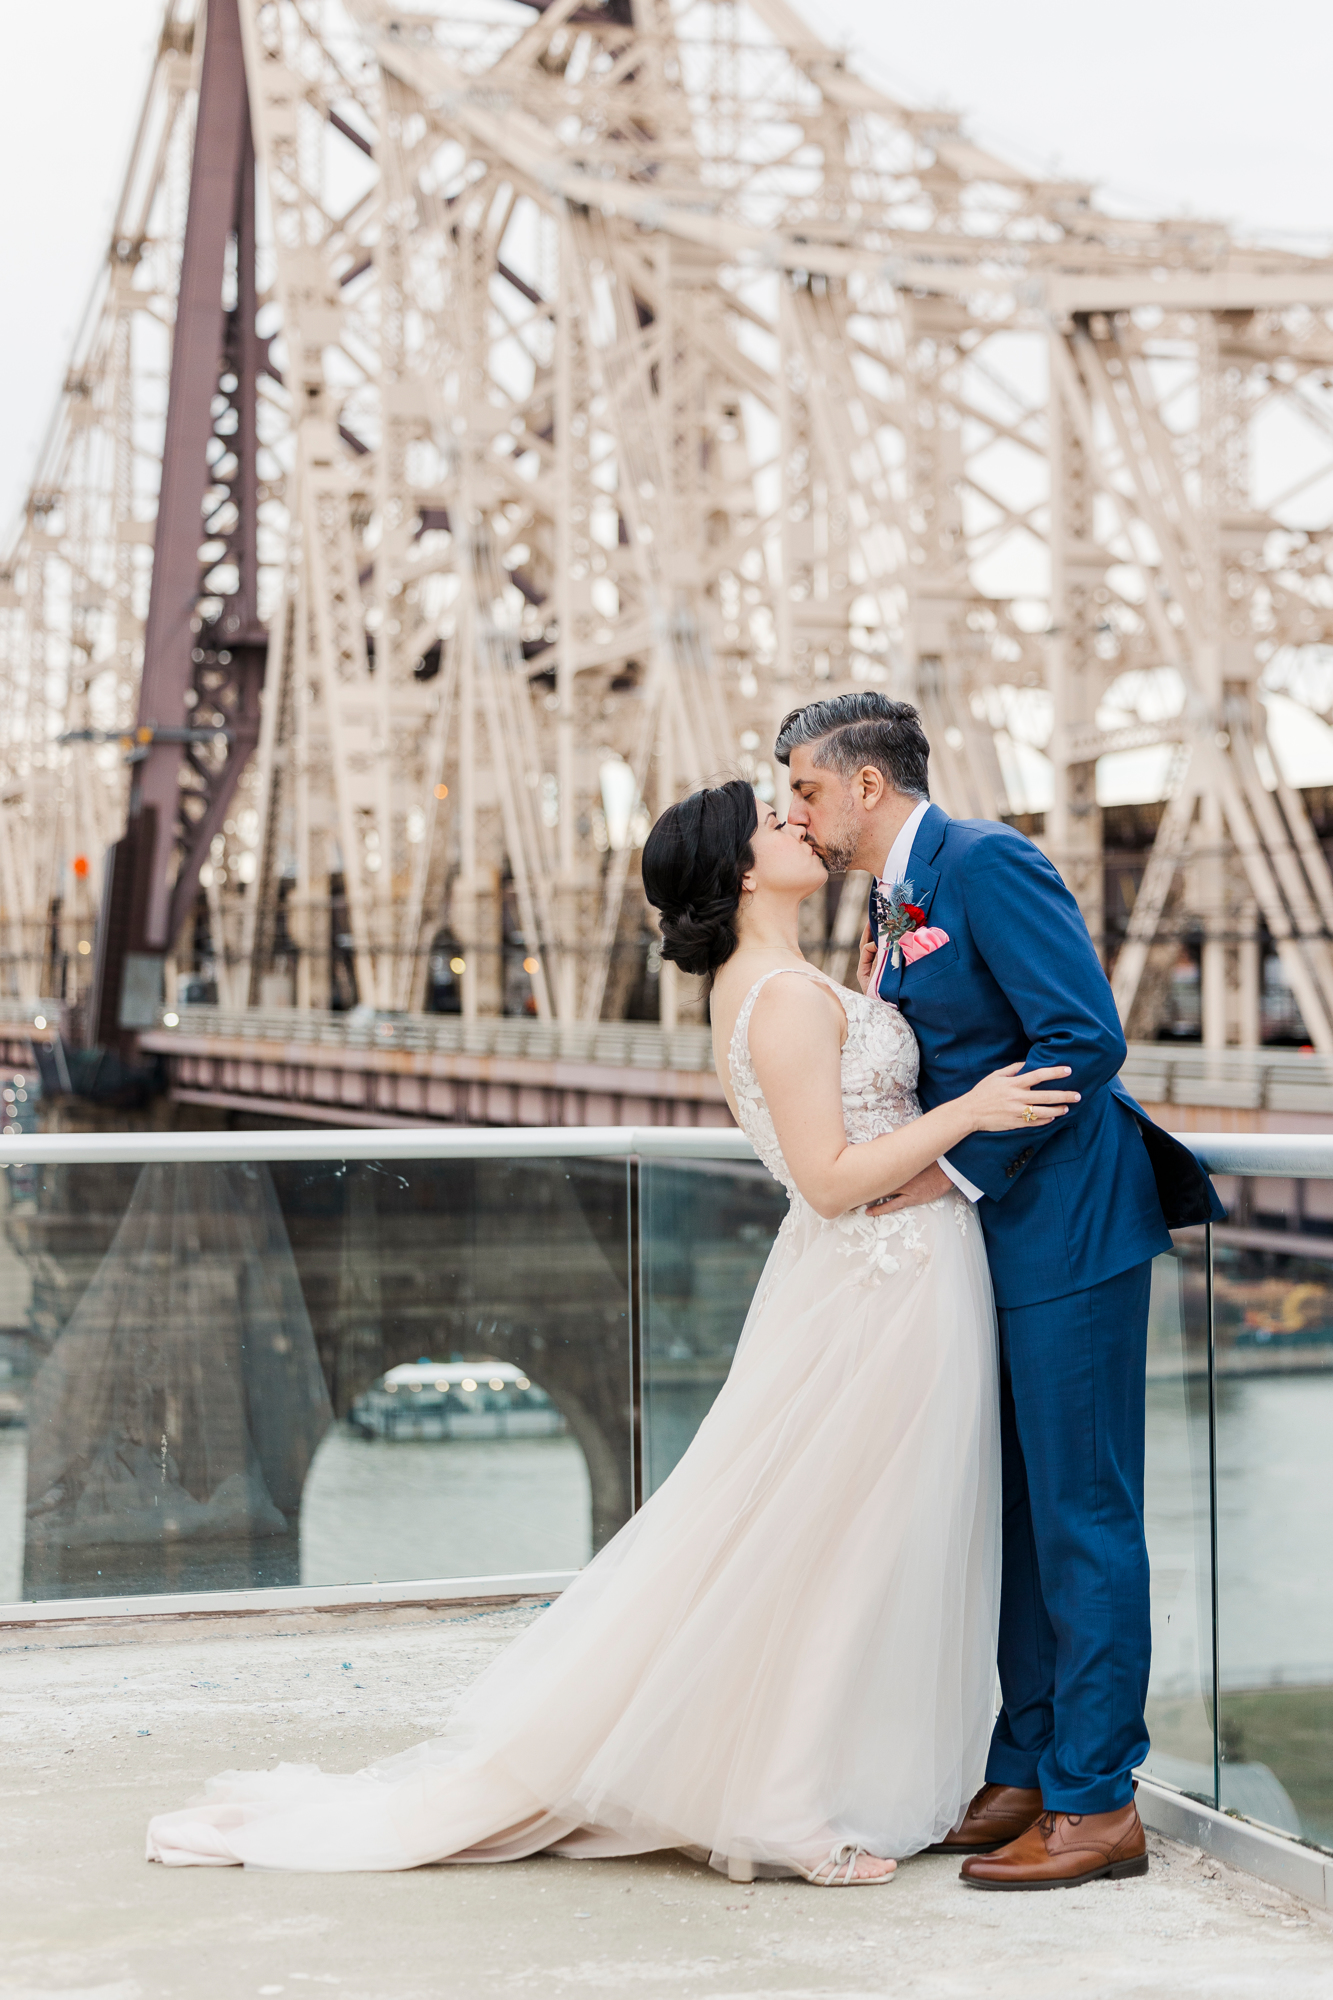 Cheerful Wedding Ceremony at the Ravel Hotel, NYC